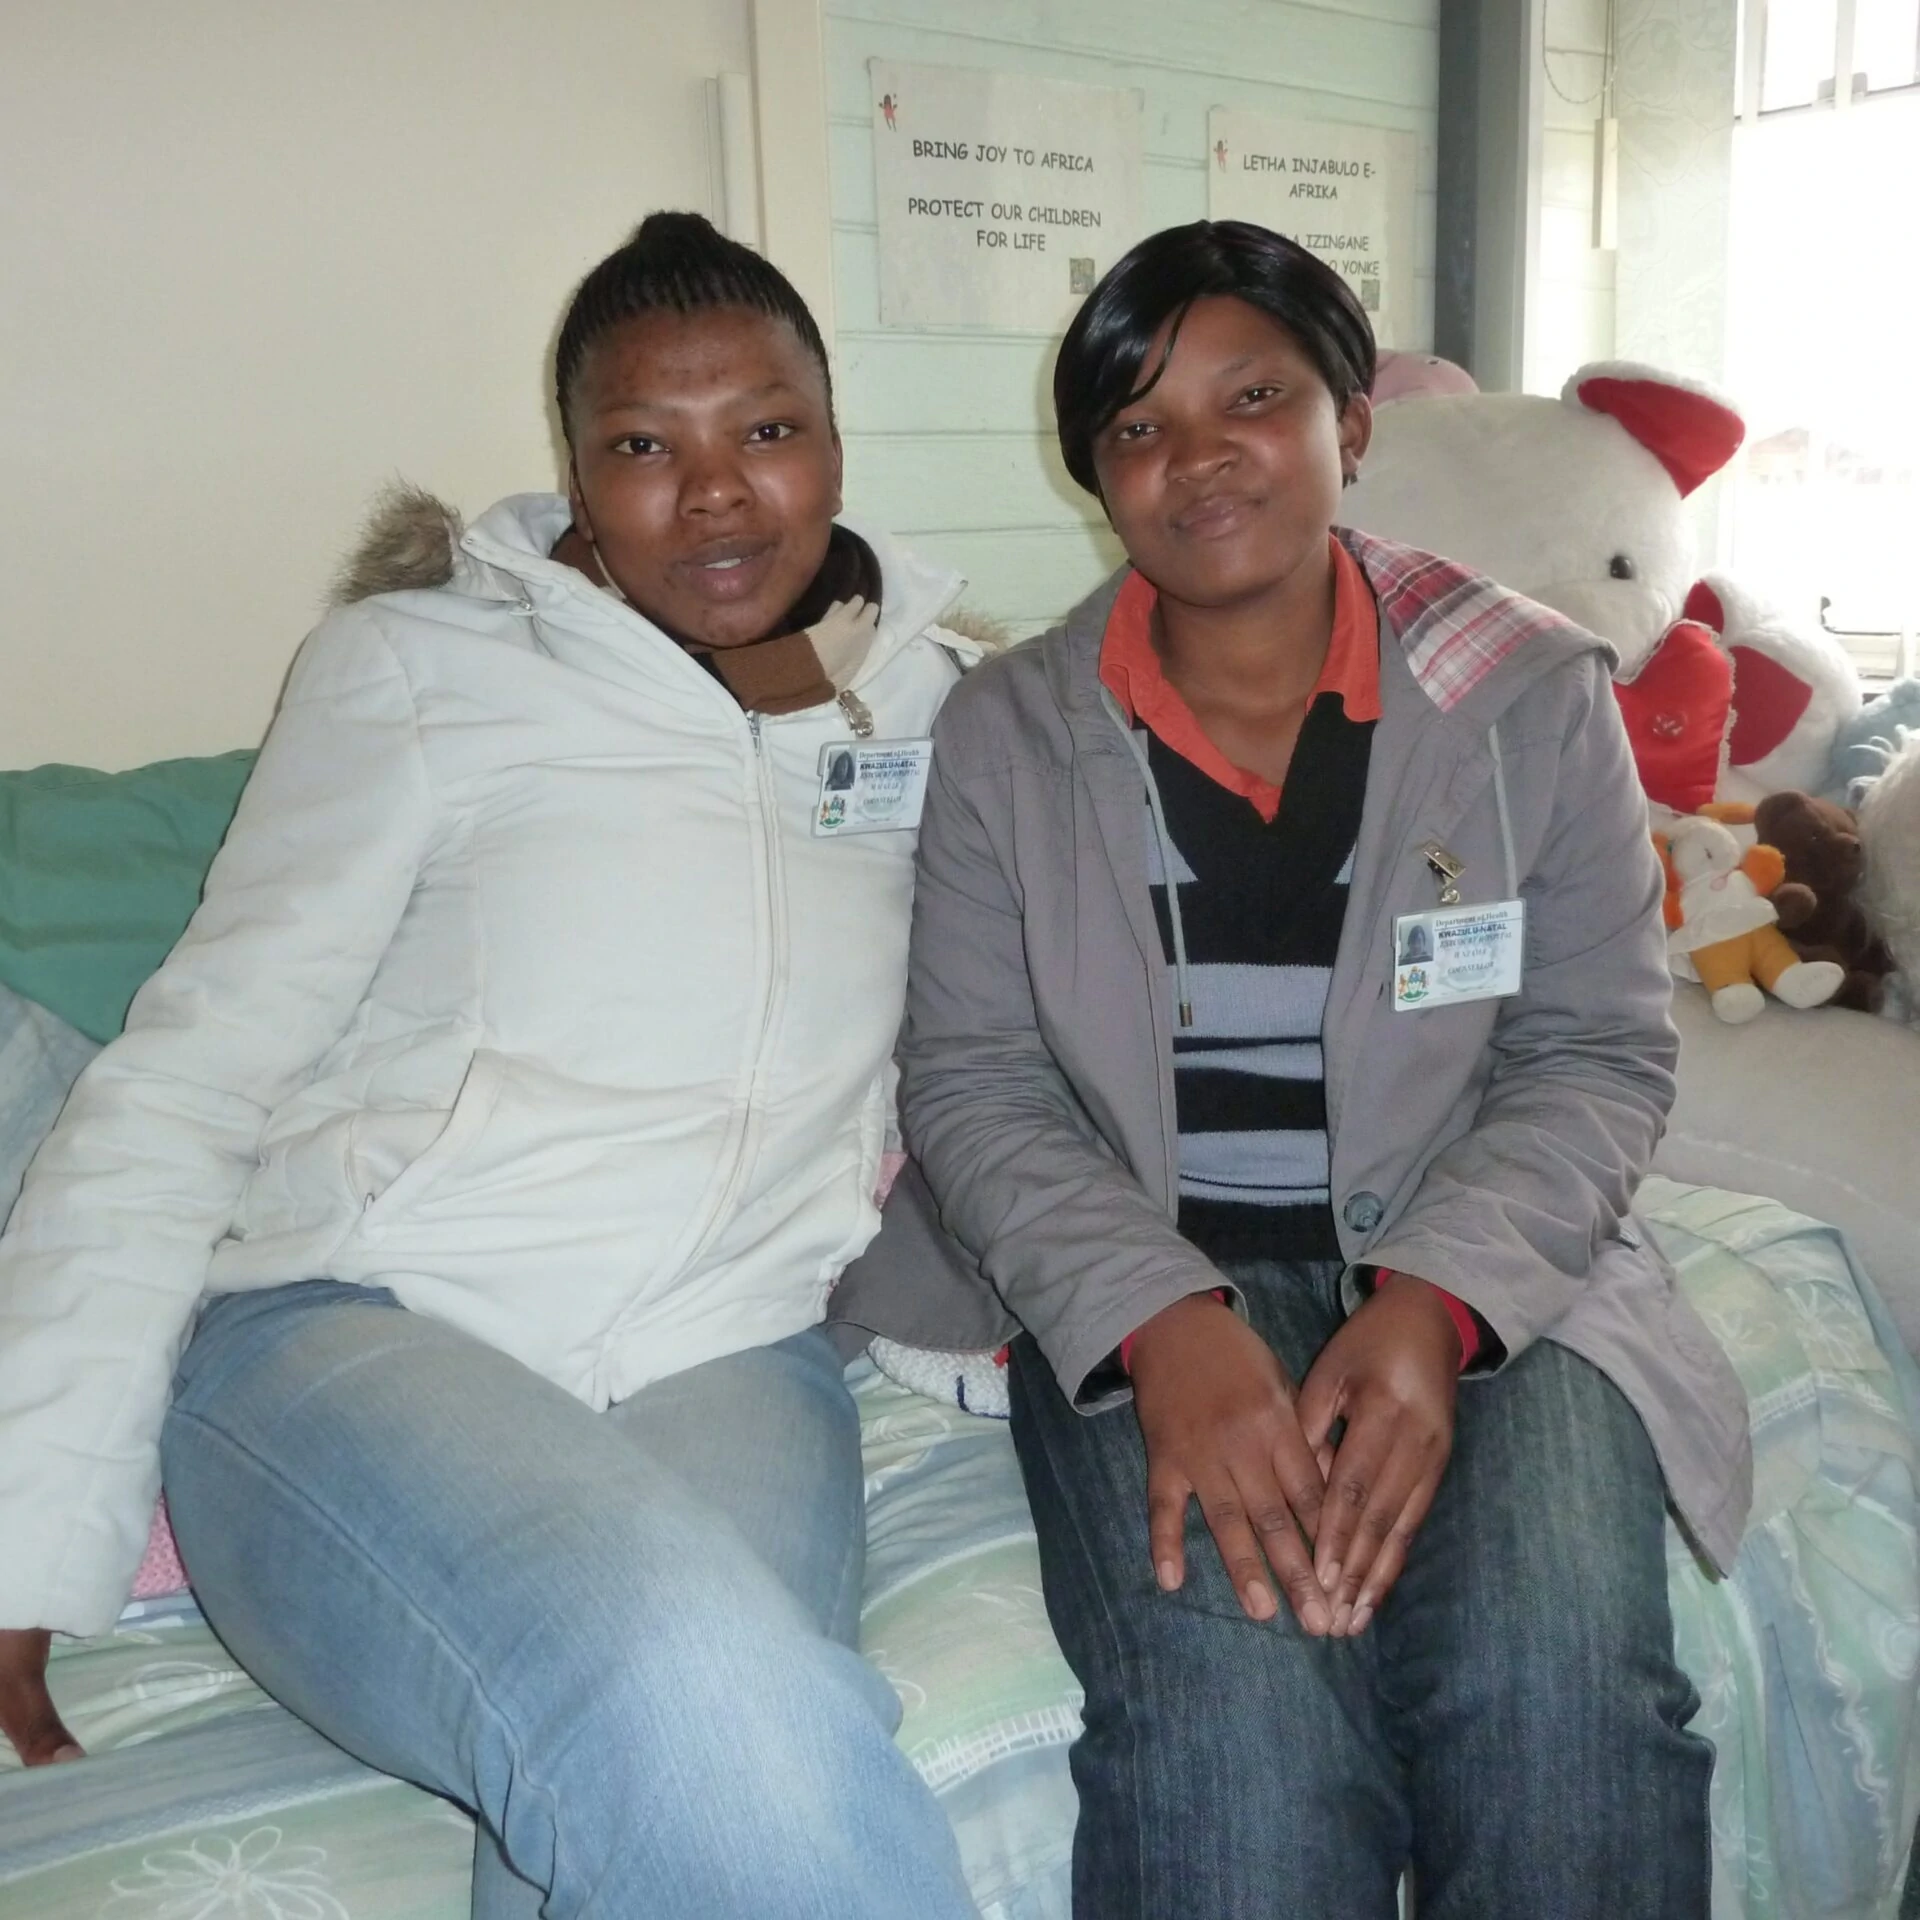 Nondumiso Gule (l.) and Haniffa Nzama (r.) from the South African organisation LifeLine care for people affected by sexual violence in the crisis centre they have set up.